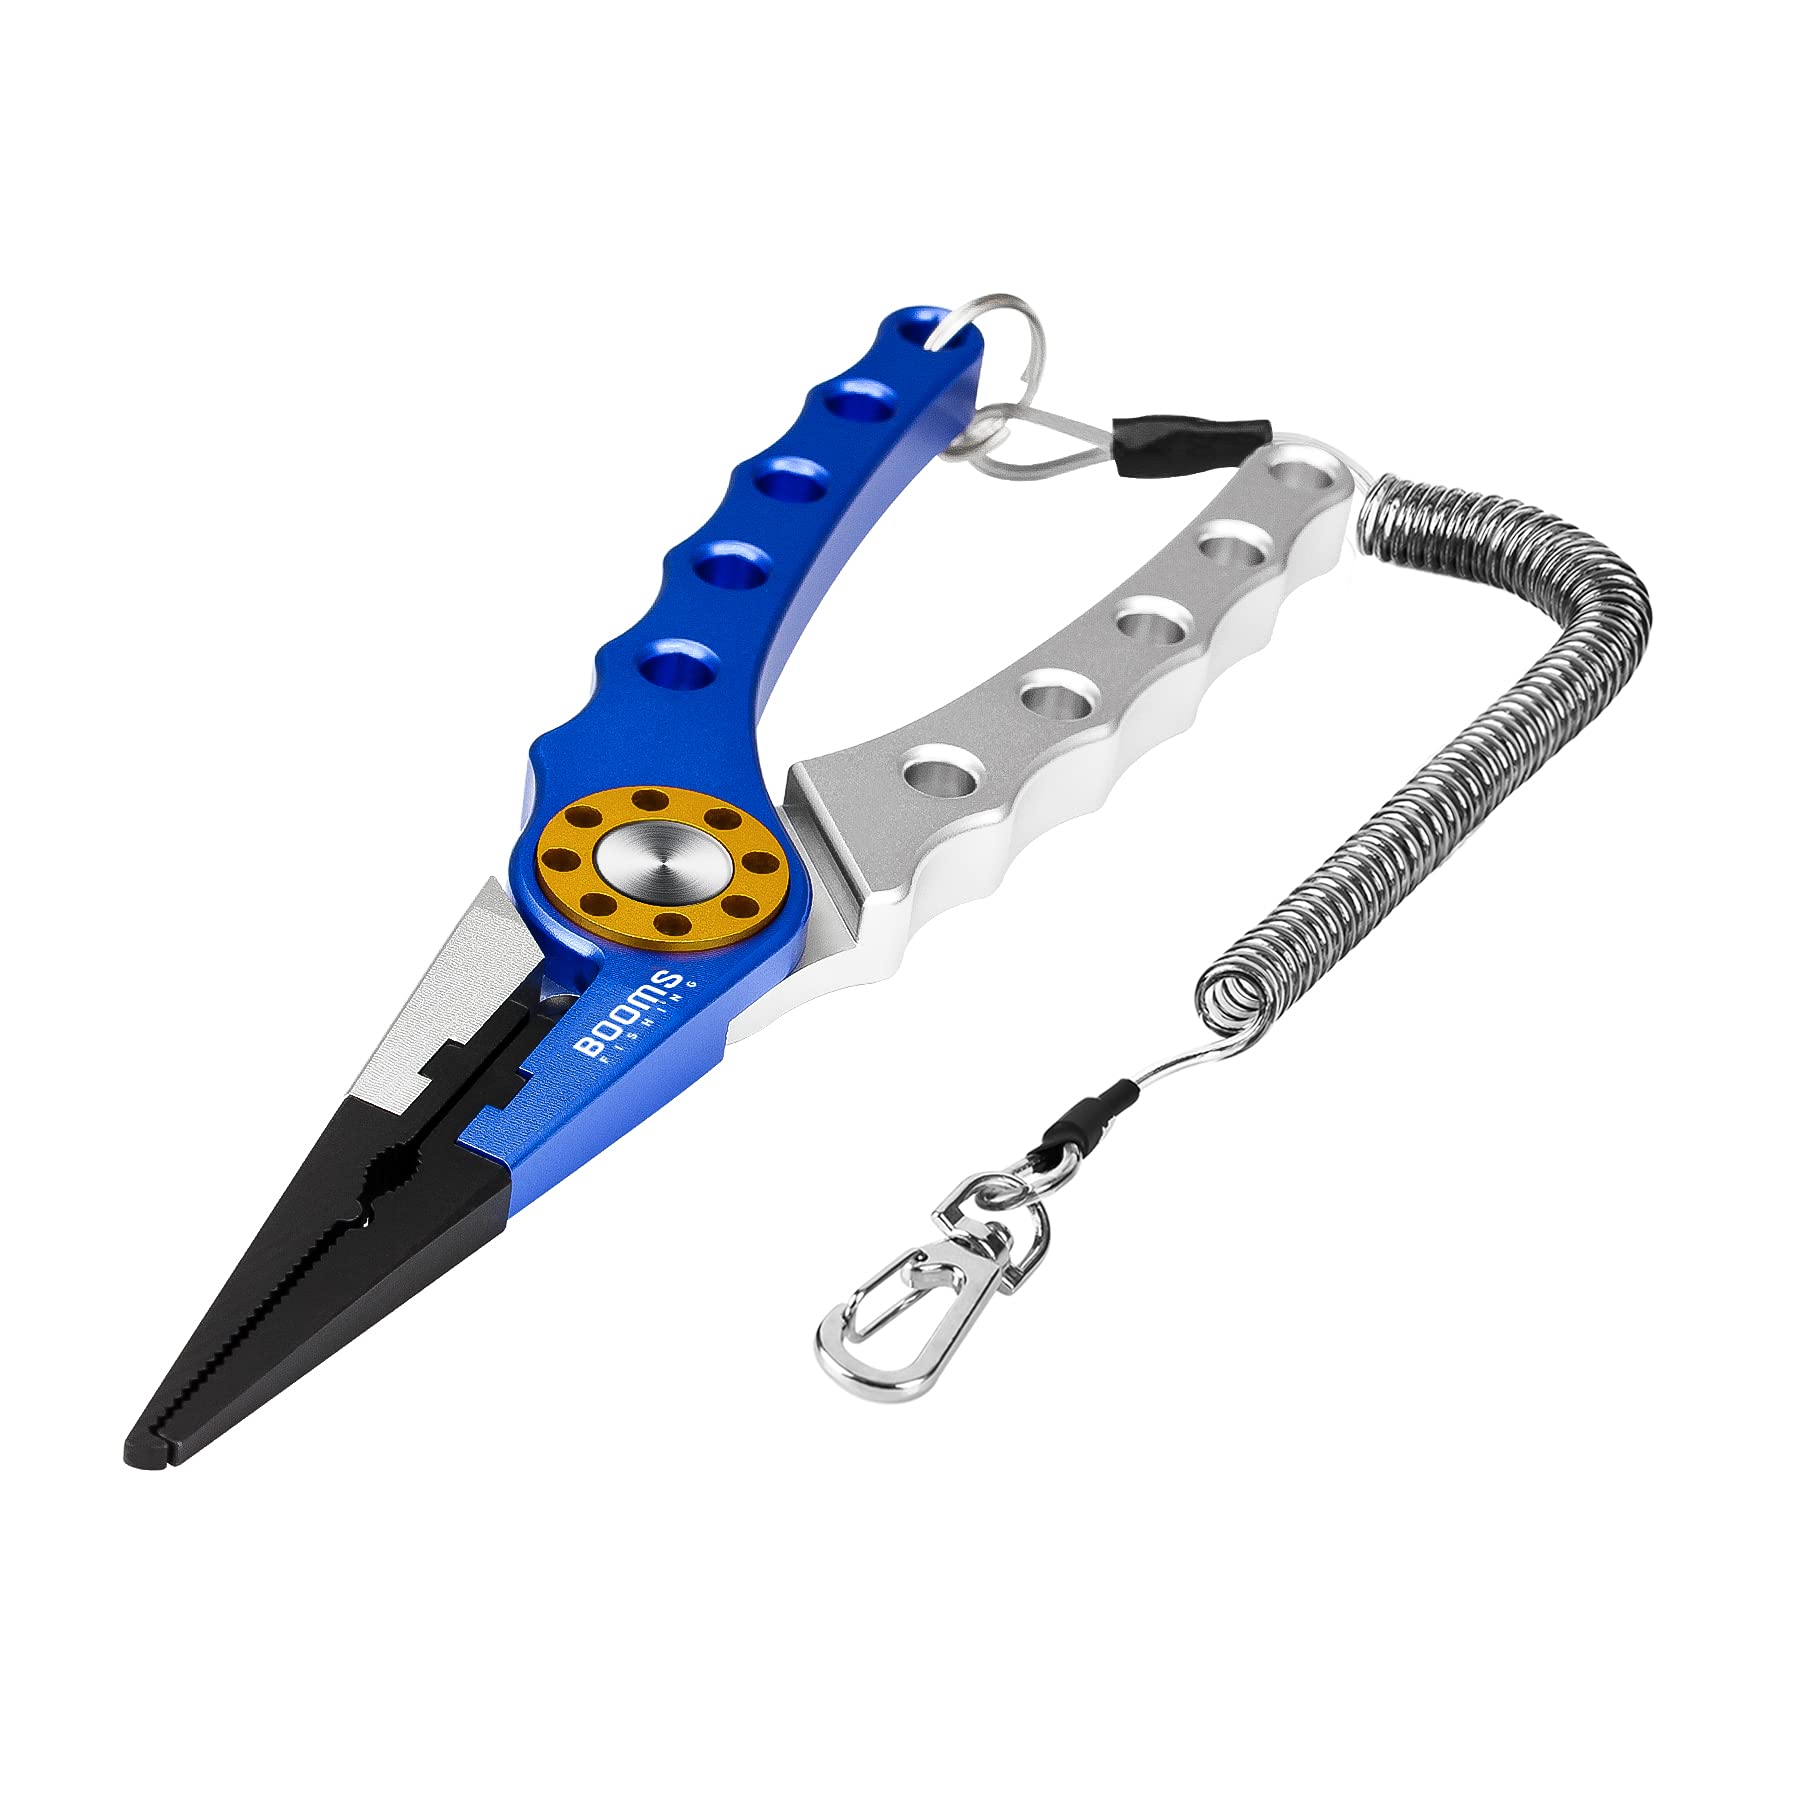  Customer reviews: Booms Fishing X1 Aluminum Fishing Pliers  Saltwater, Surf Fishing Tackle Kit, Fishing Multitool Hook Remover Braided  Fishing Line Cutting and Split Ring with Coiled Lanyard and Sheath